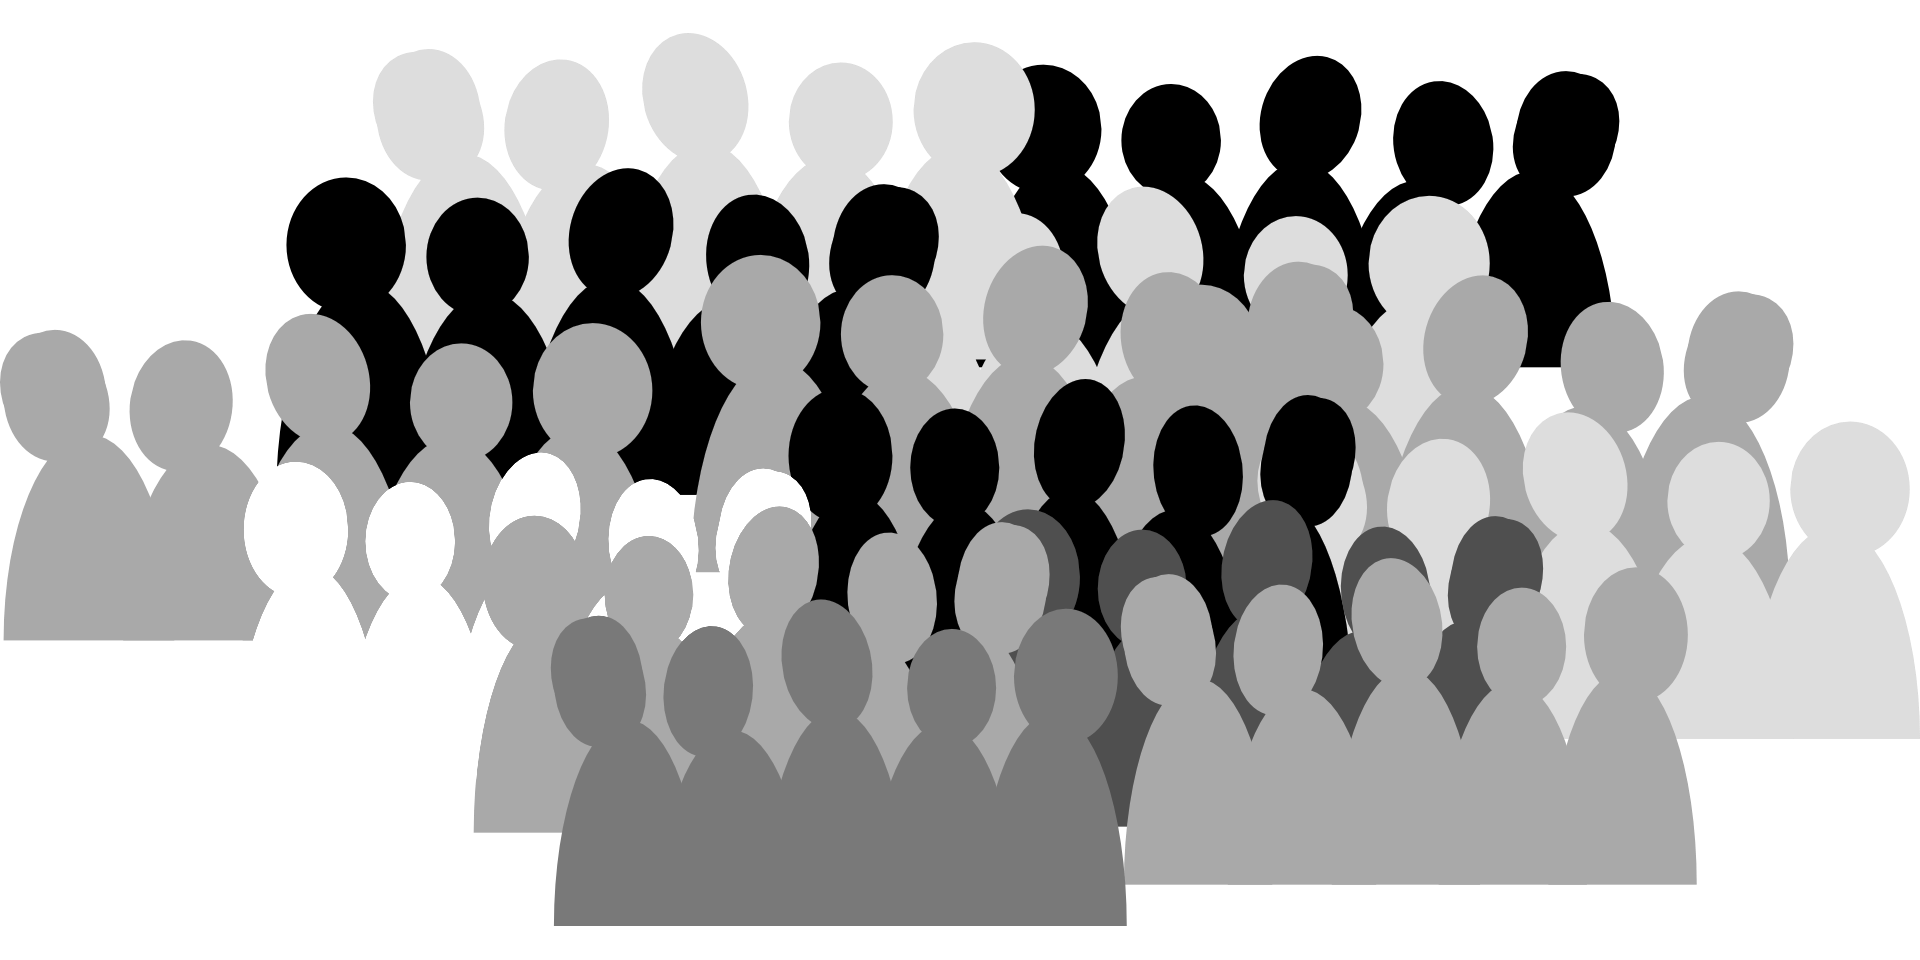 crowd silhouette png #27571